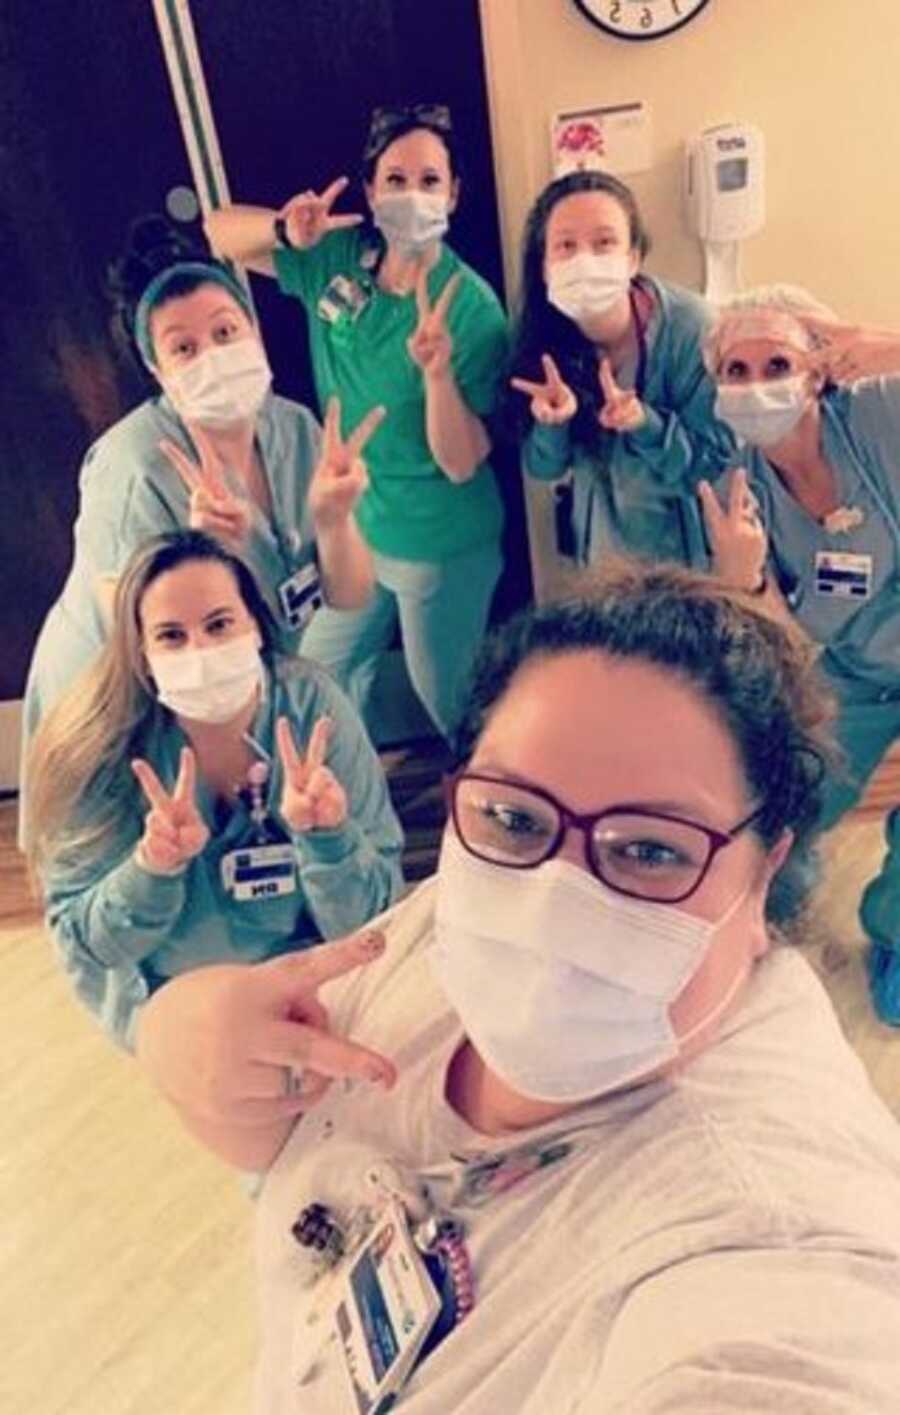 Nurses hold up two fingers for baby born at 2:22 a.m. on February 22, 2022.